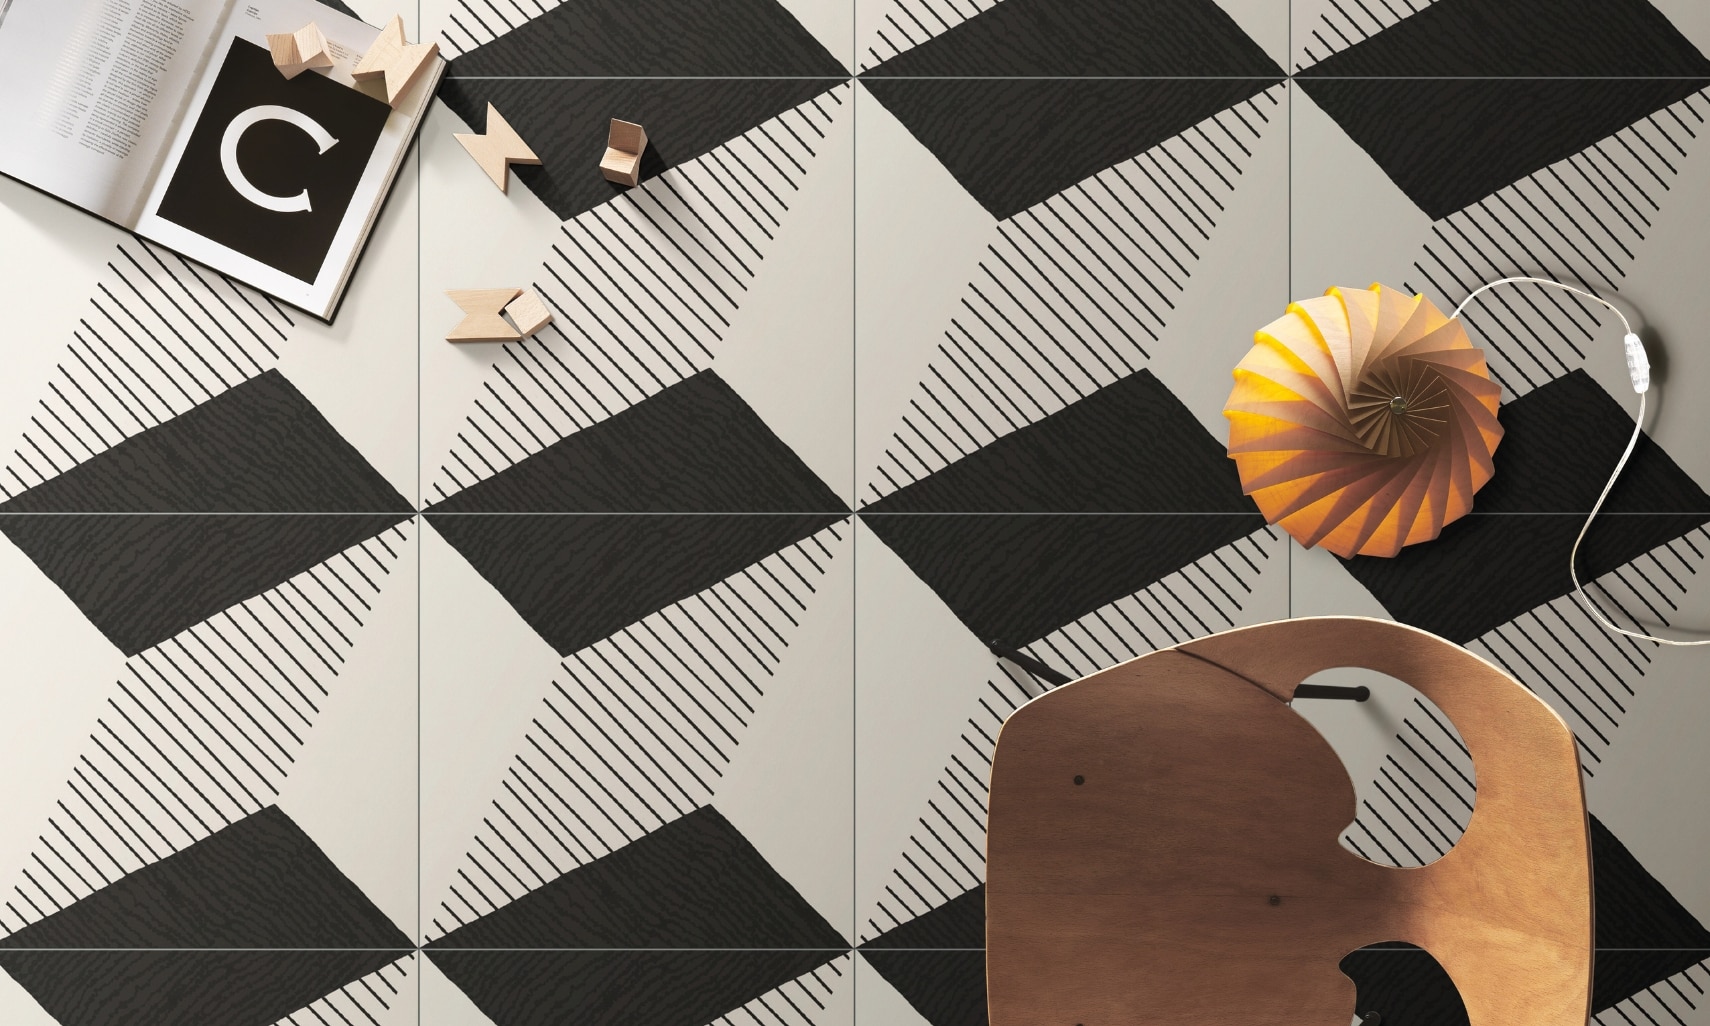 Bird’s eye view of black and white geometric floor tile, small floor lamp next to wooden chair, wood blocks and open book.